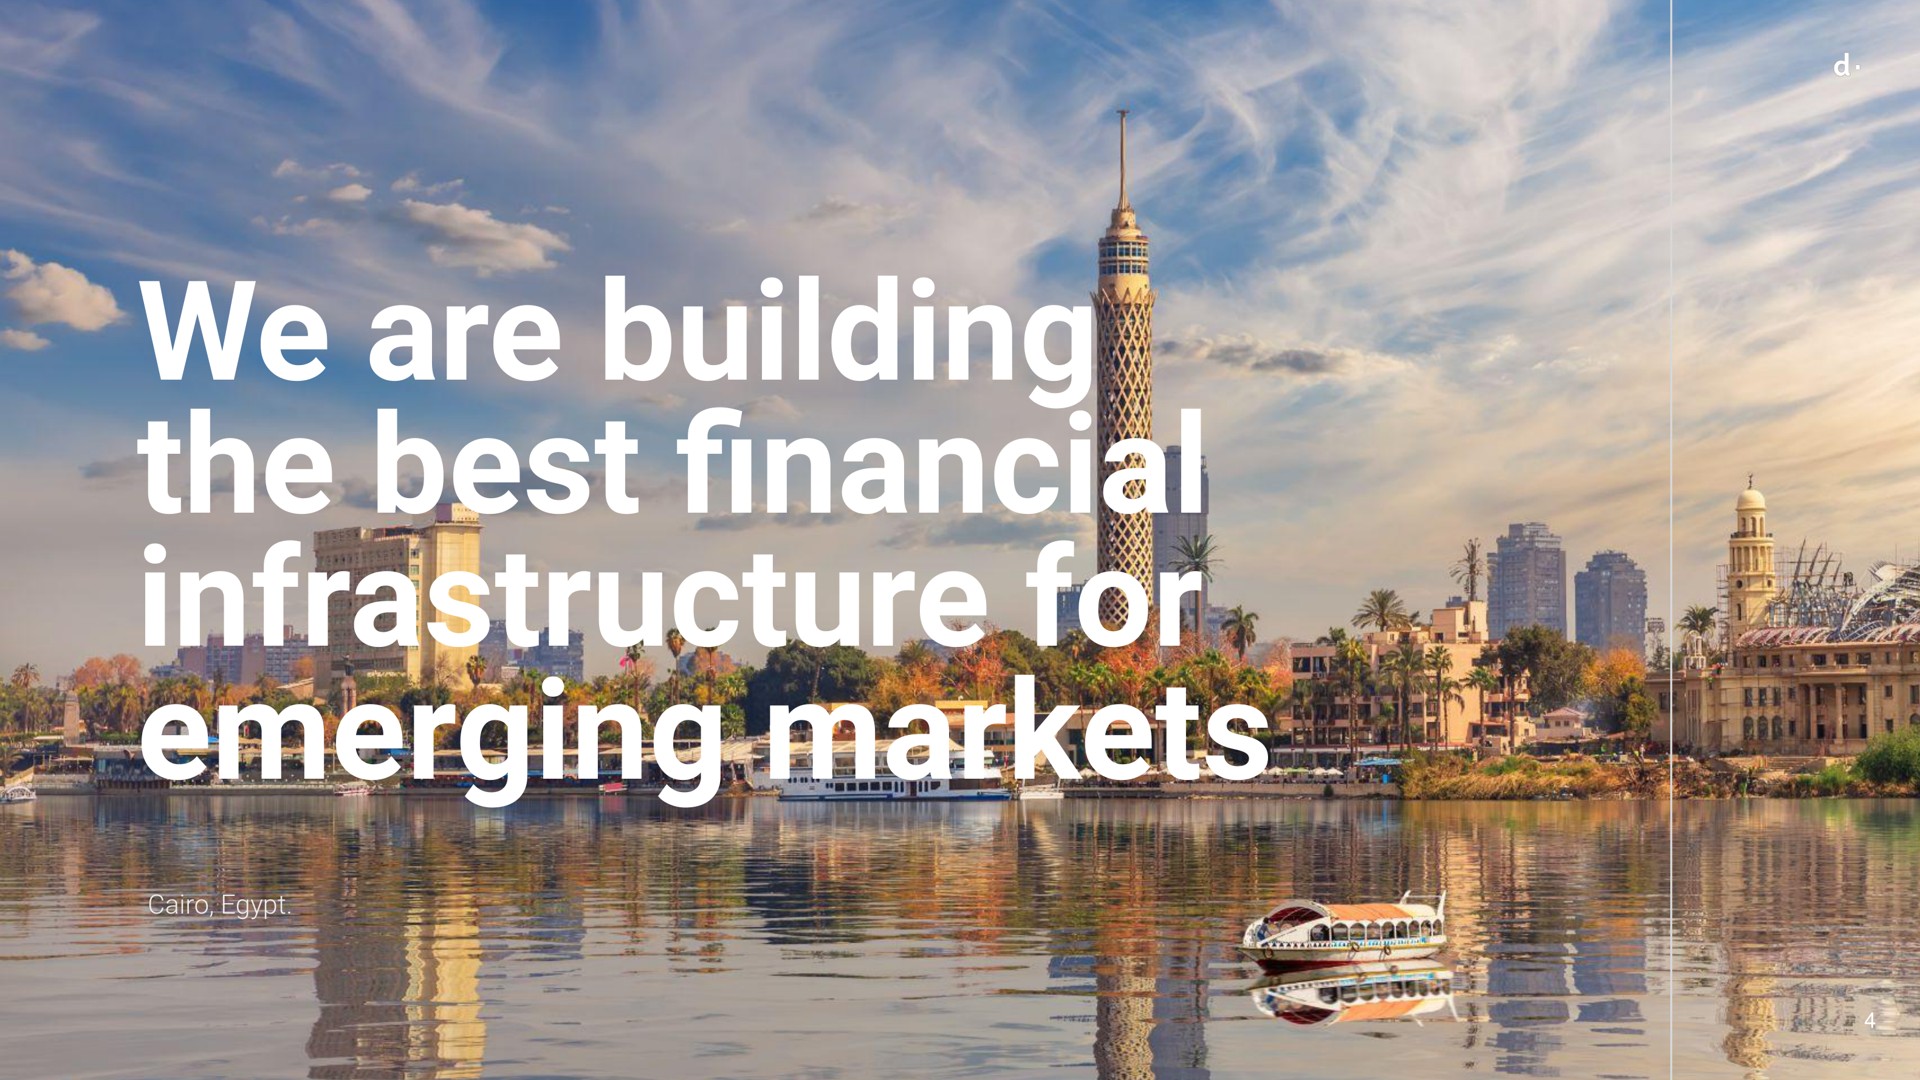 we are building the best infrastructure for emerging markets | dLocal